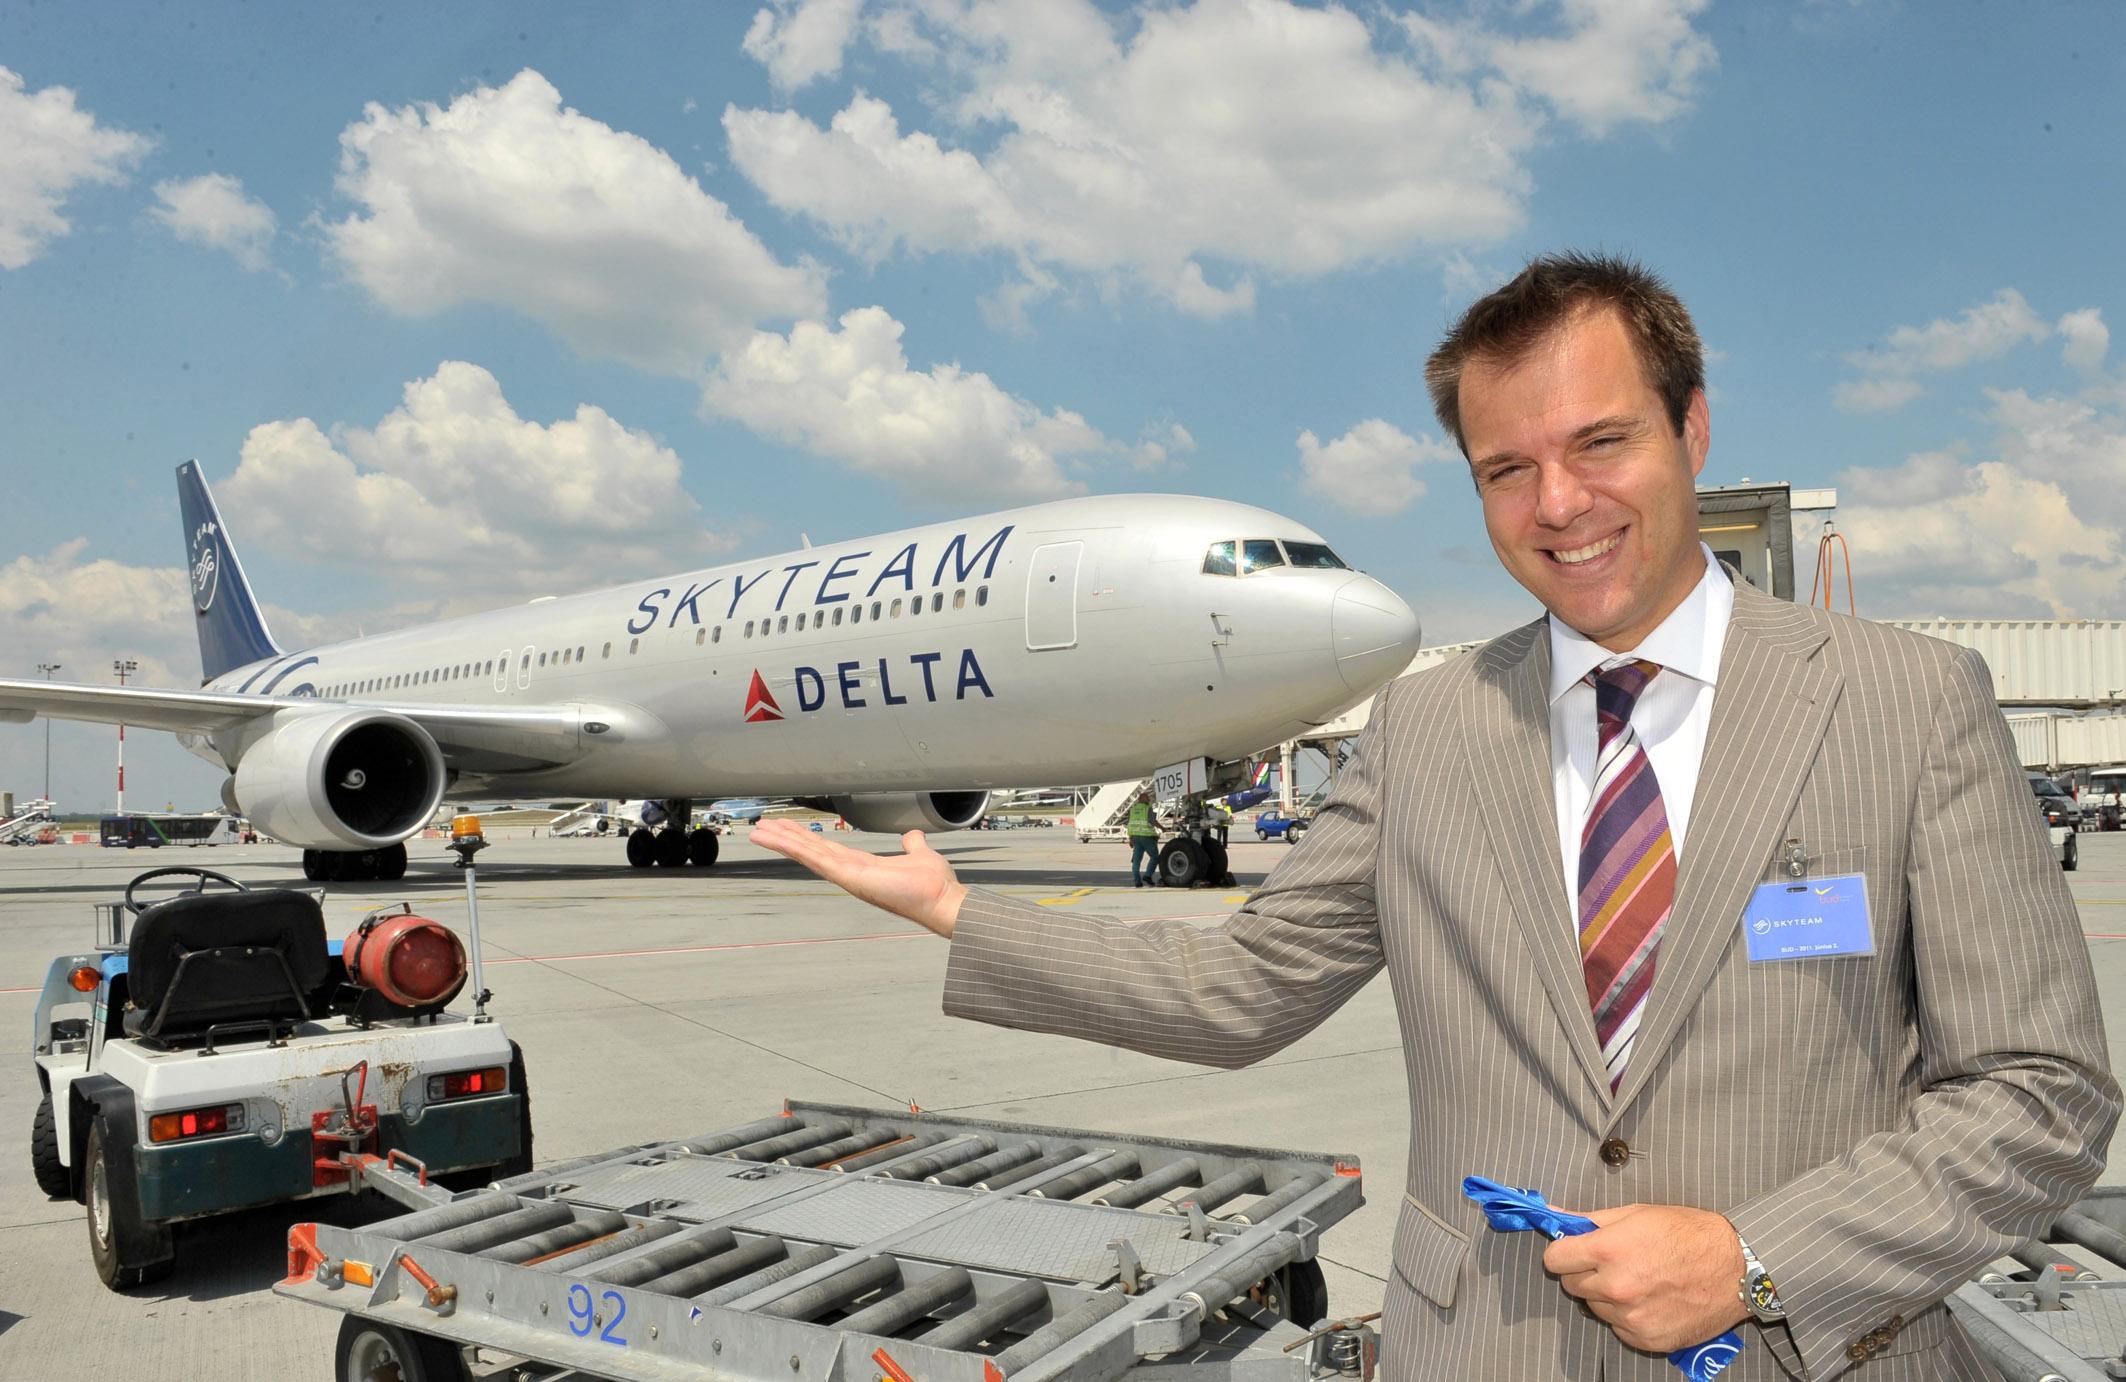 Special Interview: Botond Melles, Country Manager Hungary, Air France KLM Delta